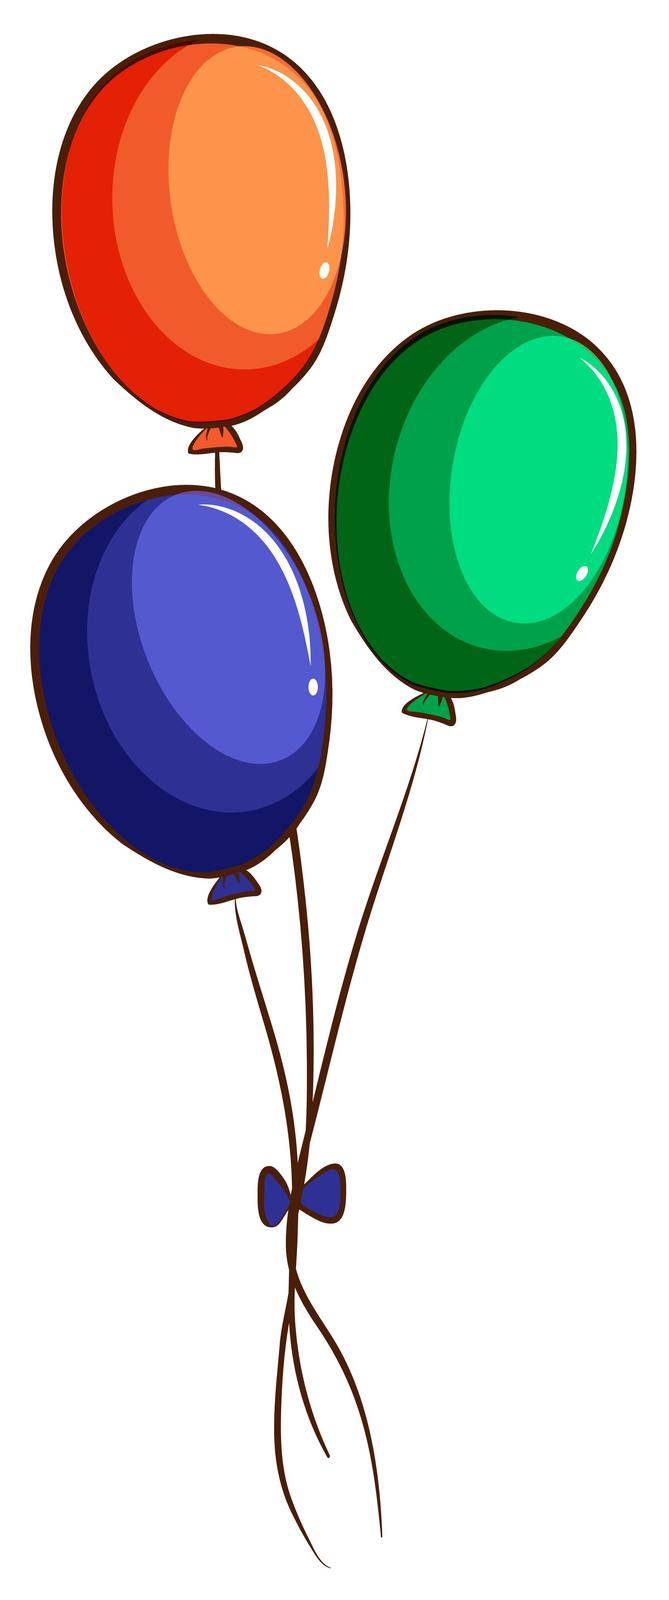 A drawing of three colourful balloons by iimages